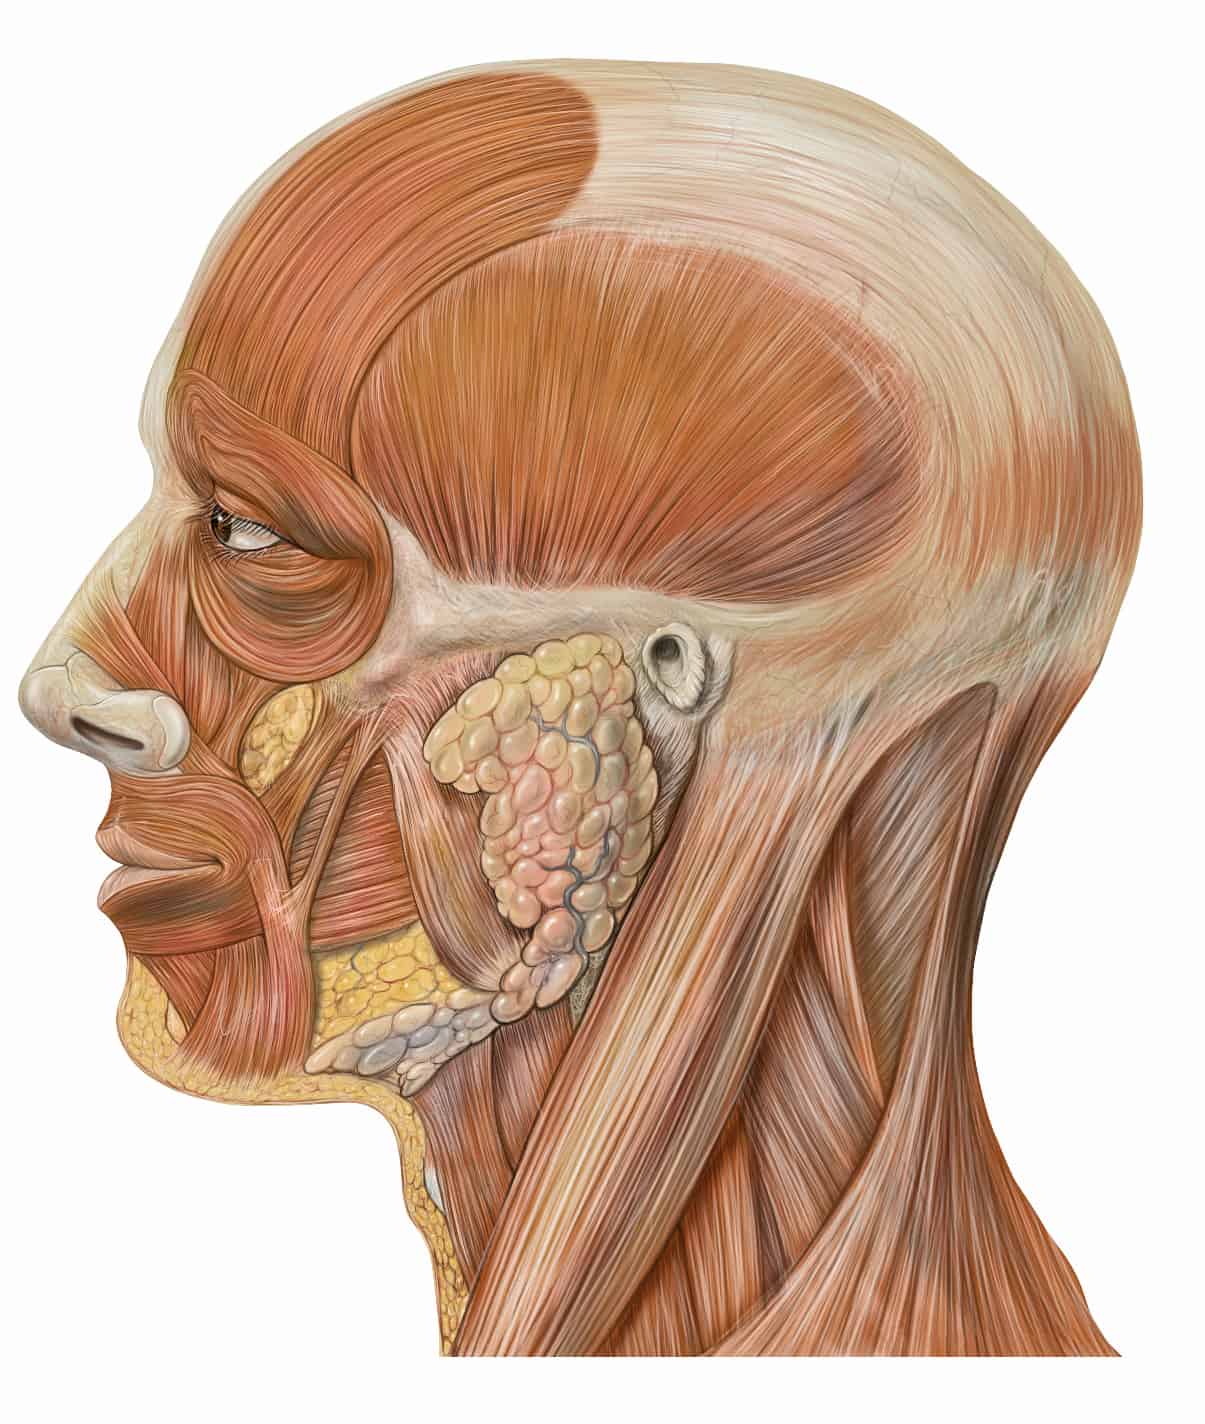 Facial muscles by Patrick J. Lynch, medical illustrator